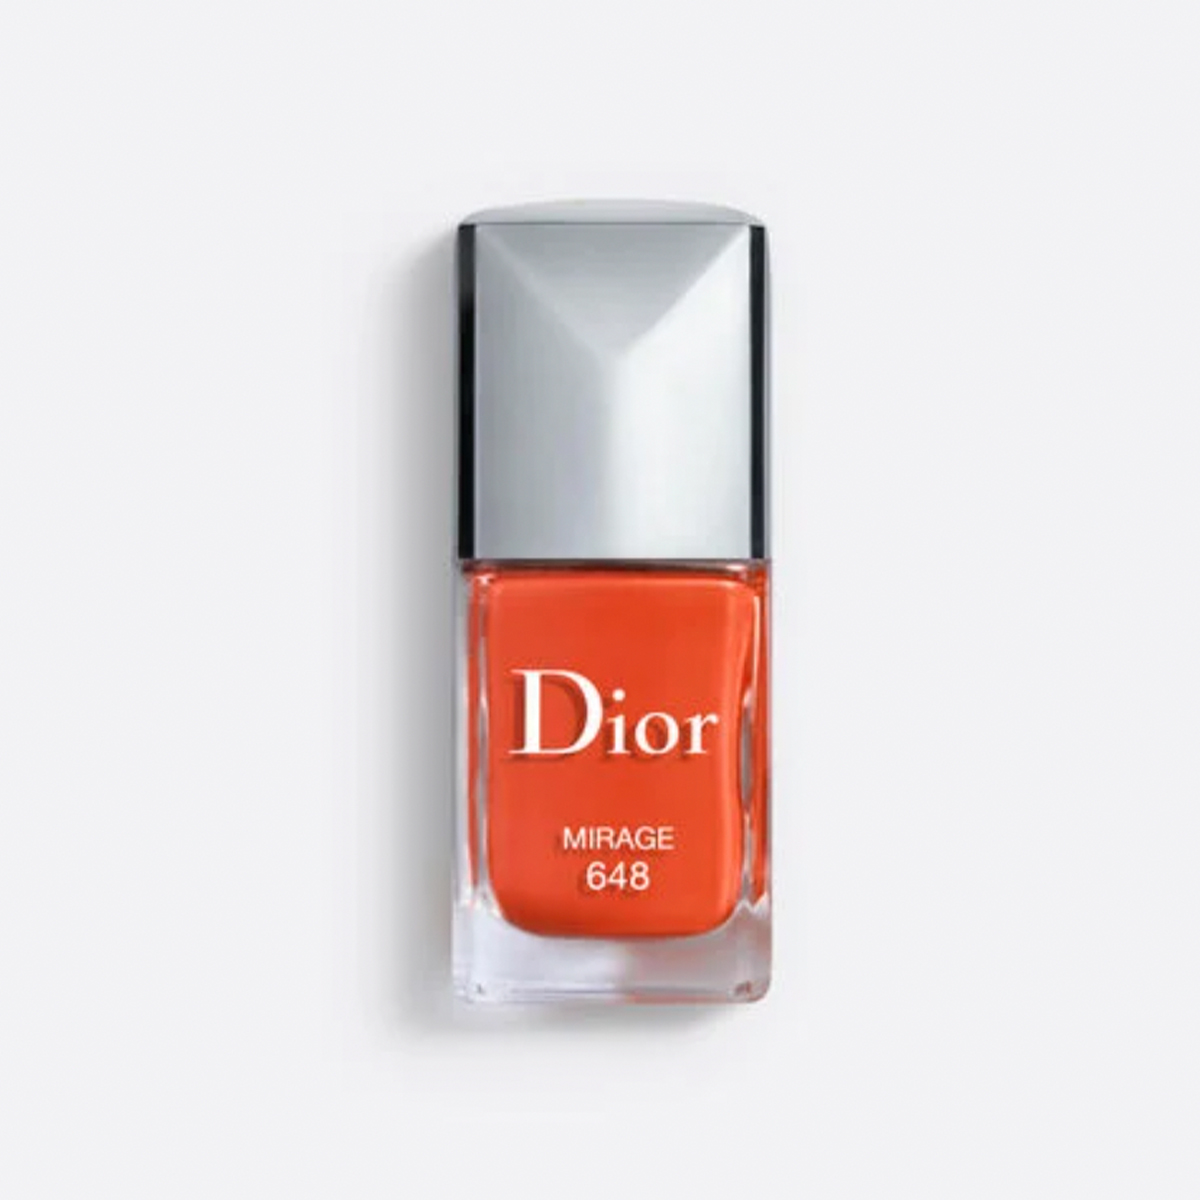 18 April Nail Colors That Are So Dreamy | Who What Wear